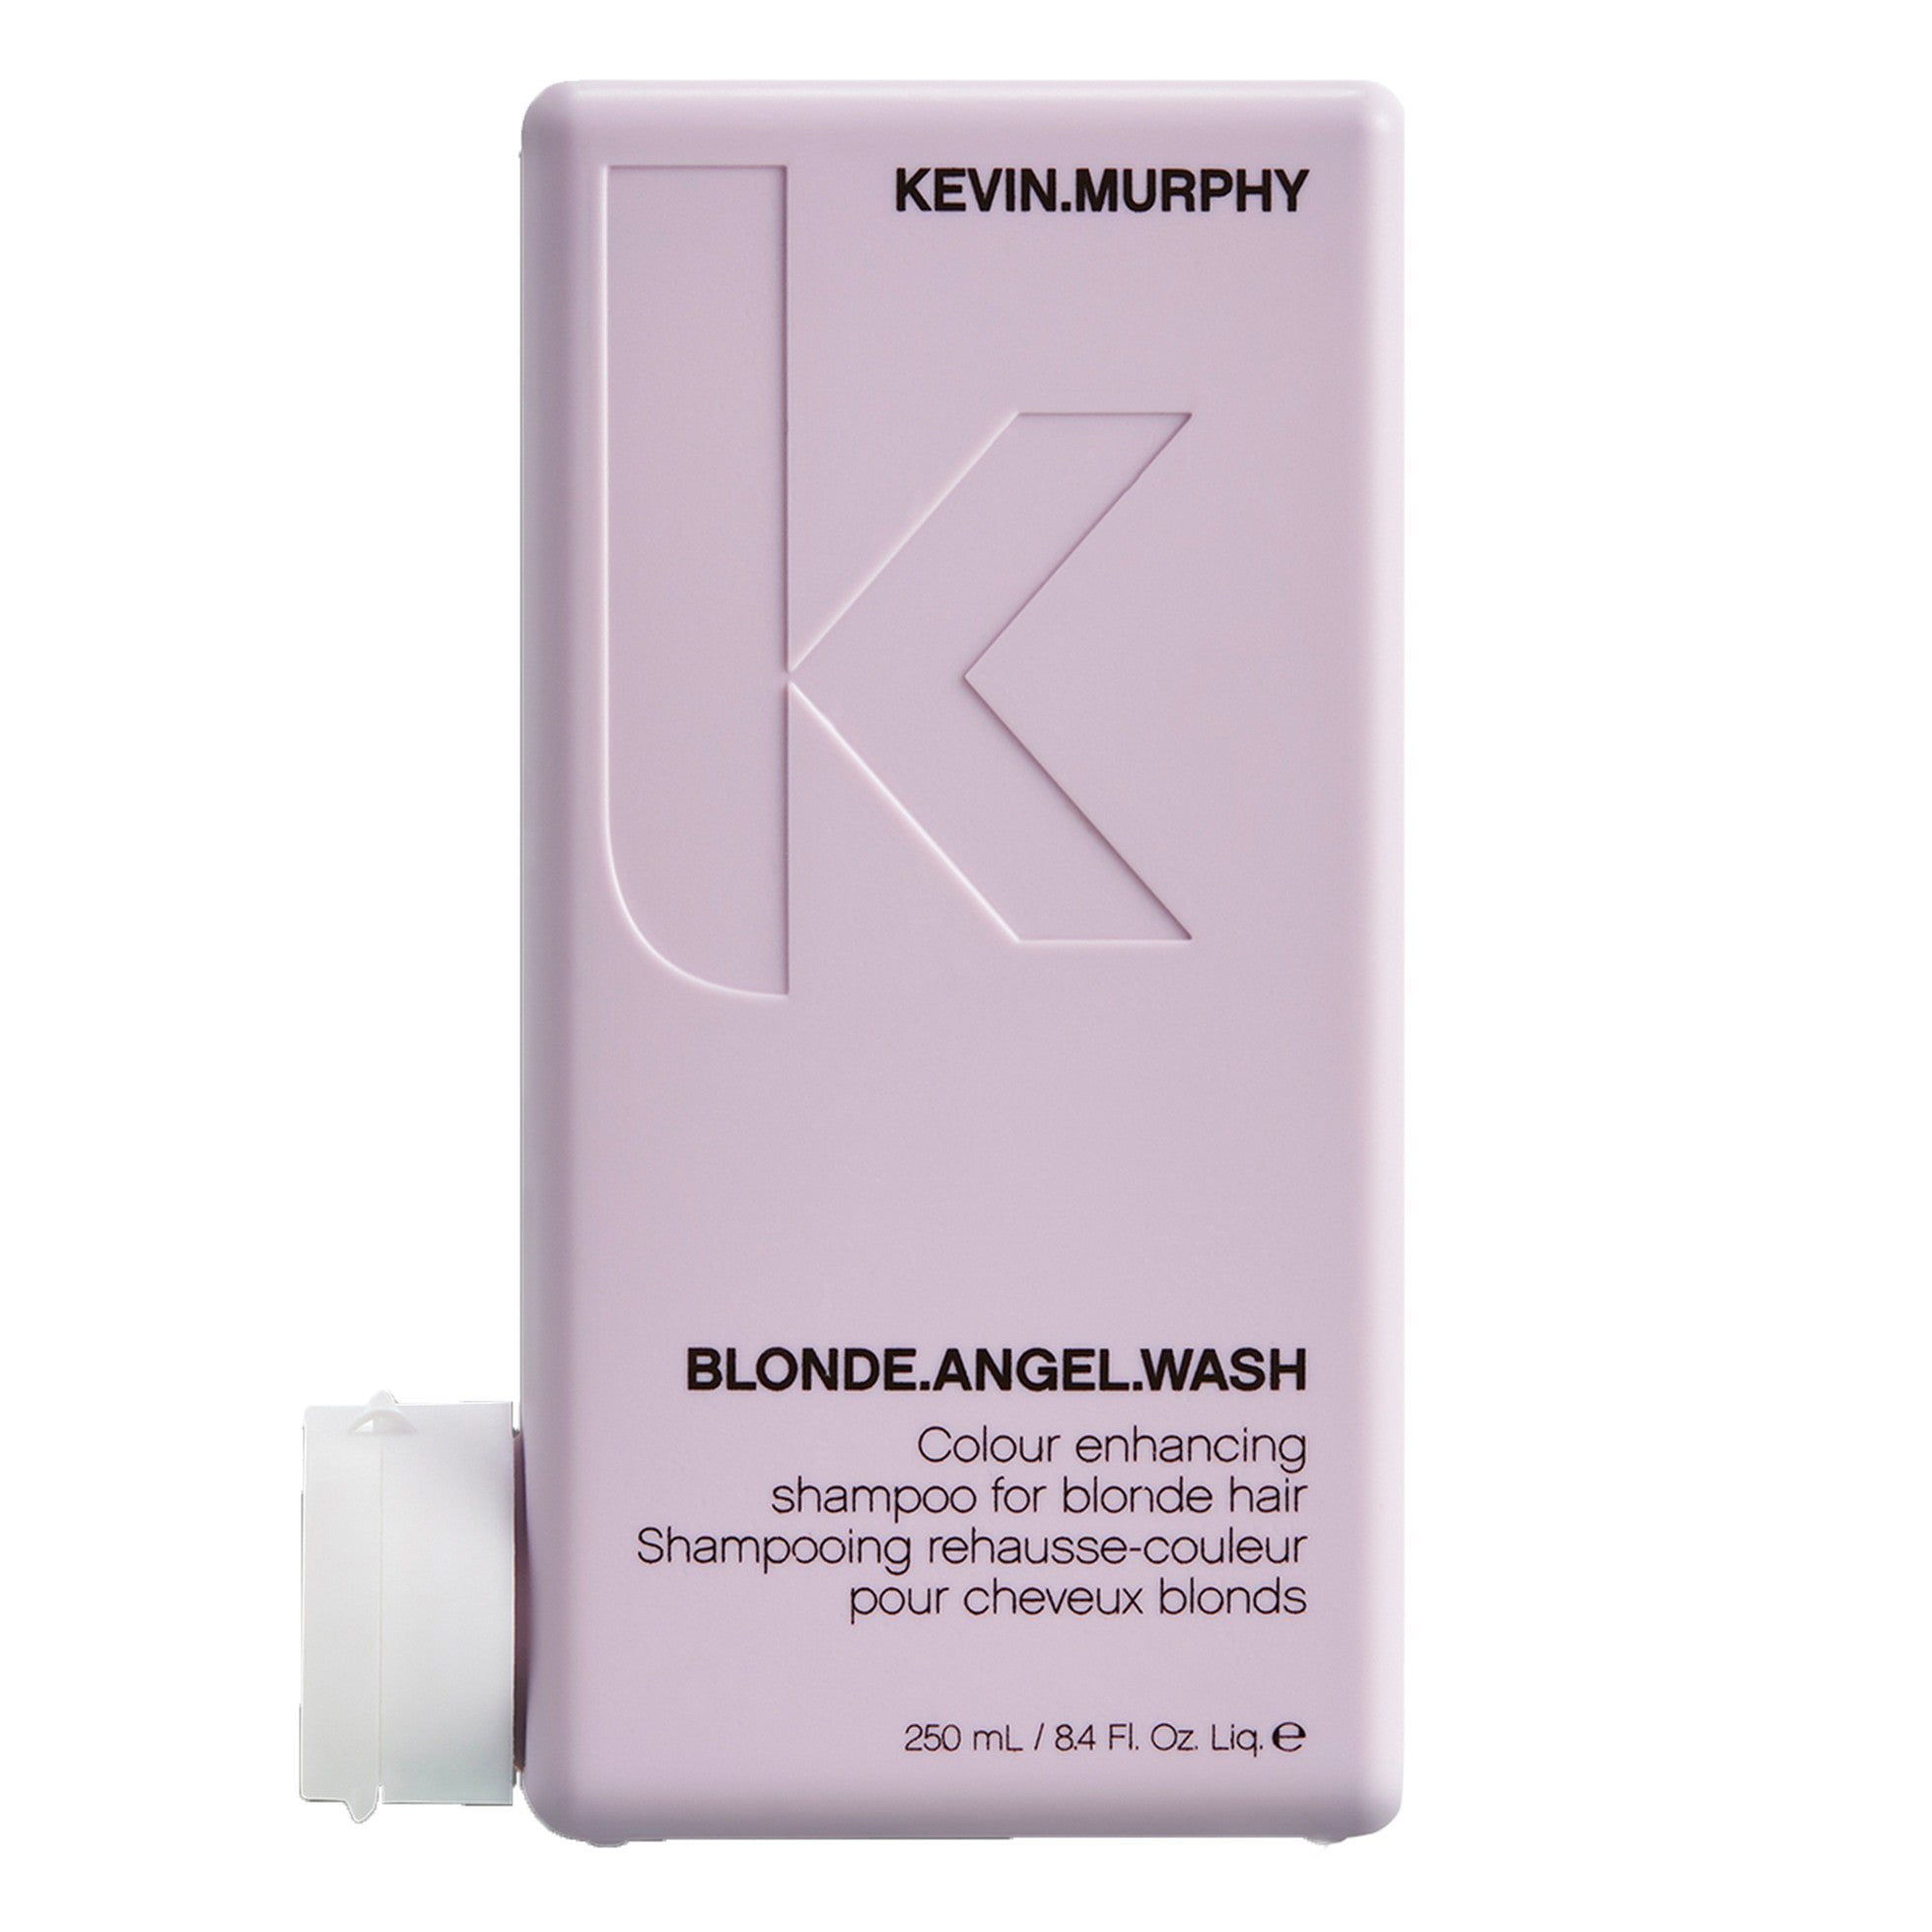 Lily morgenmad tvetydigheden Kevin Murphy Blonde Angel Shampoo, 8.4 Ounce - Walmart.com